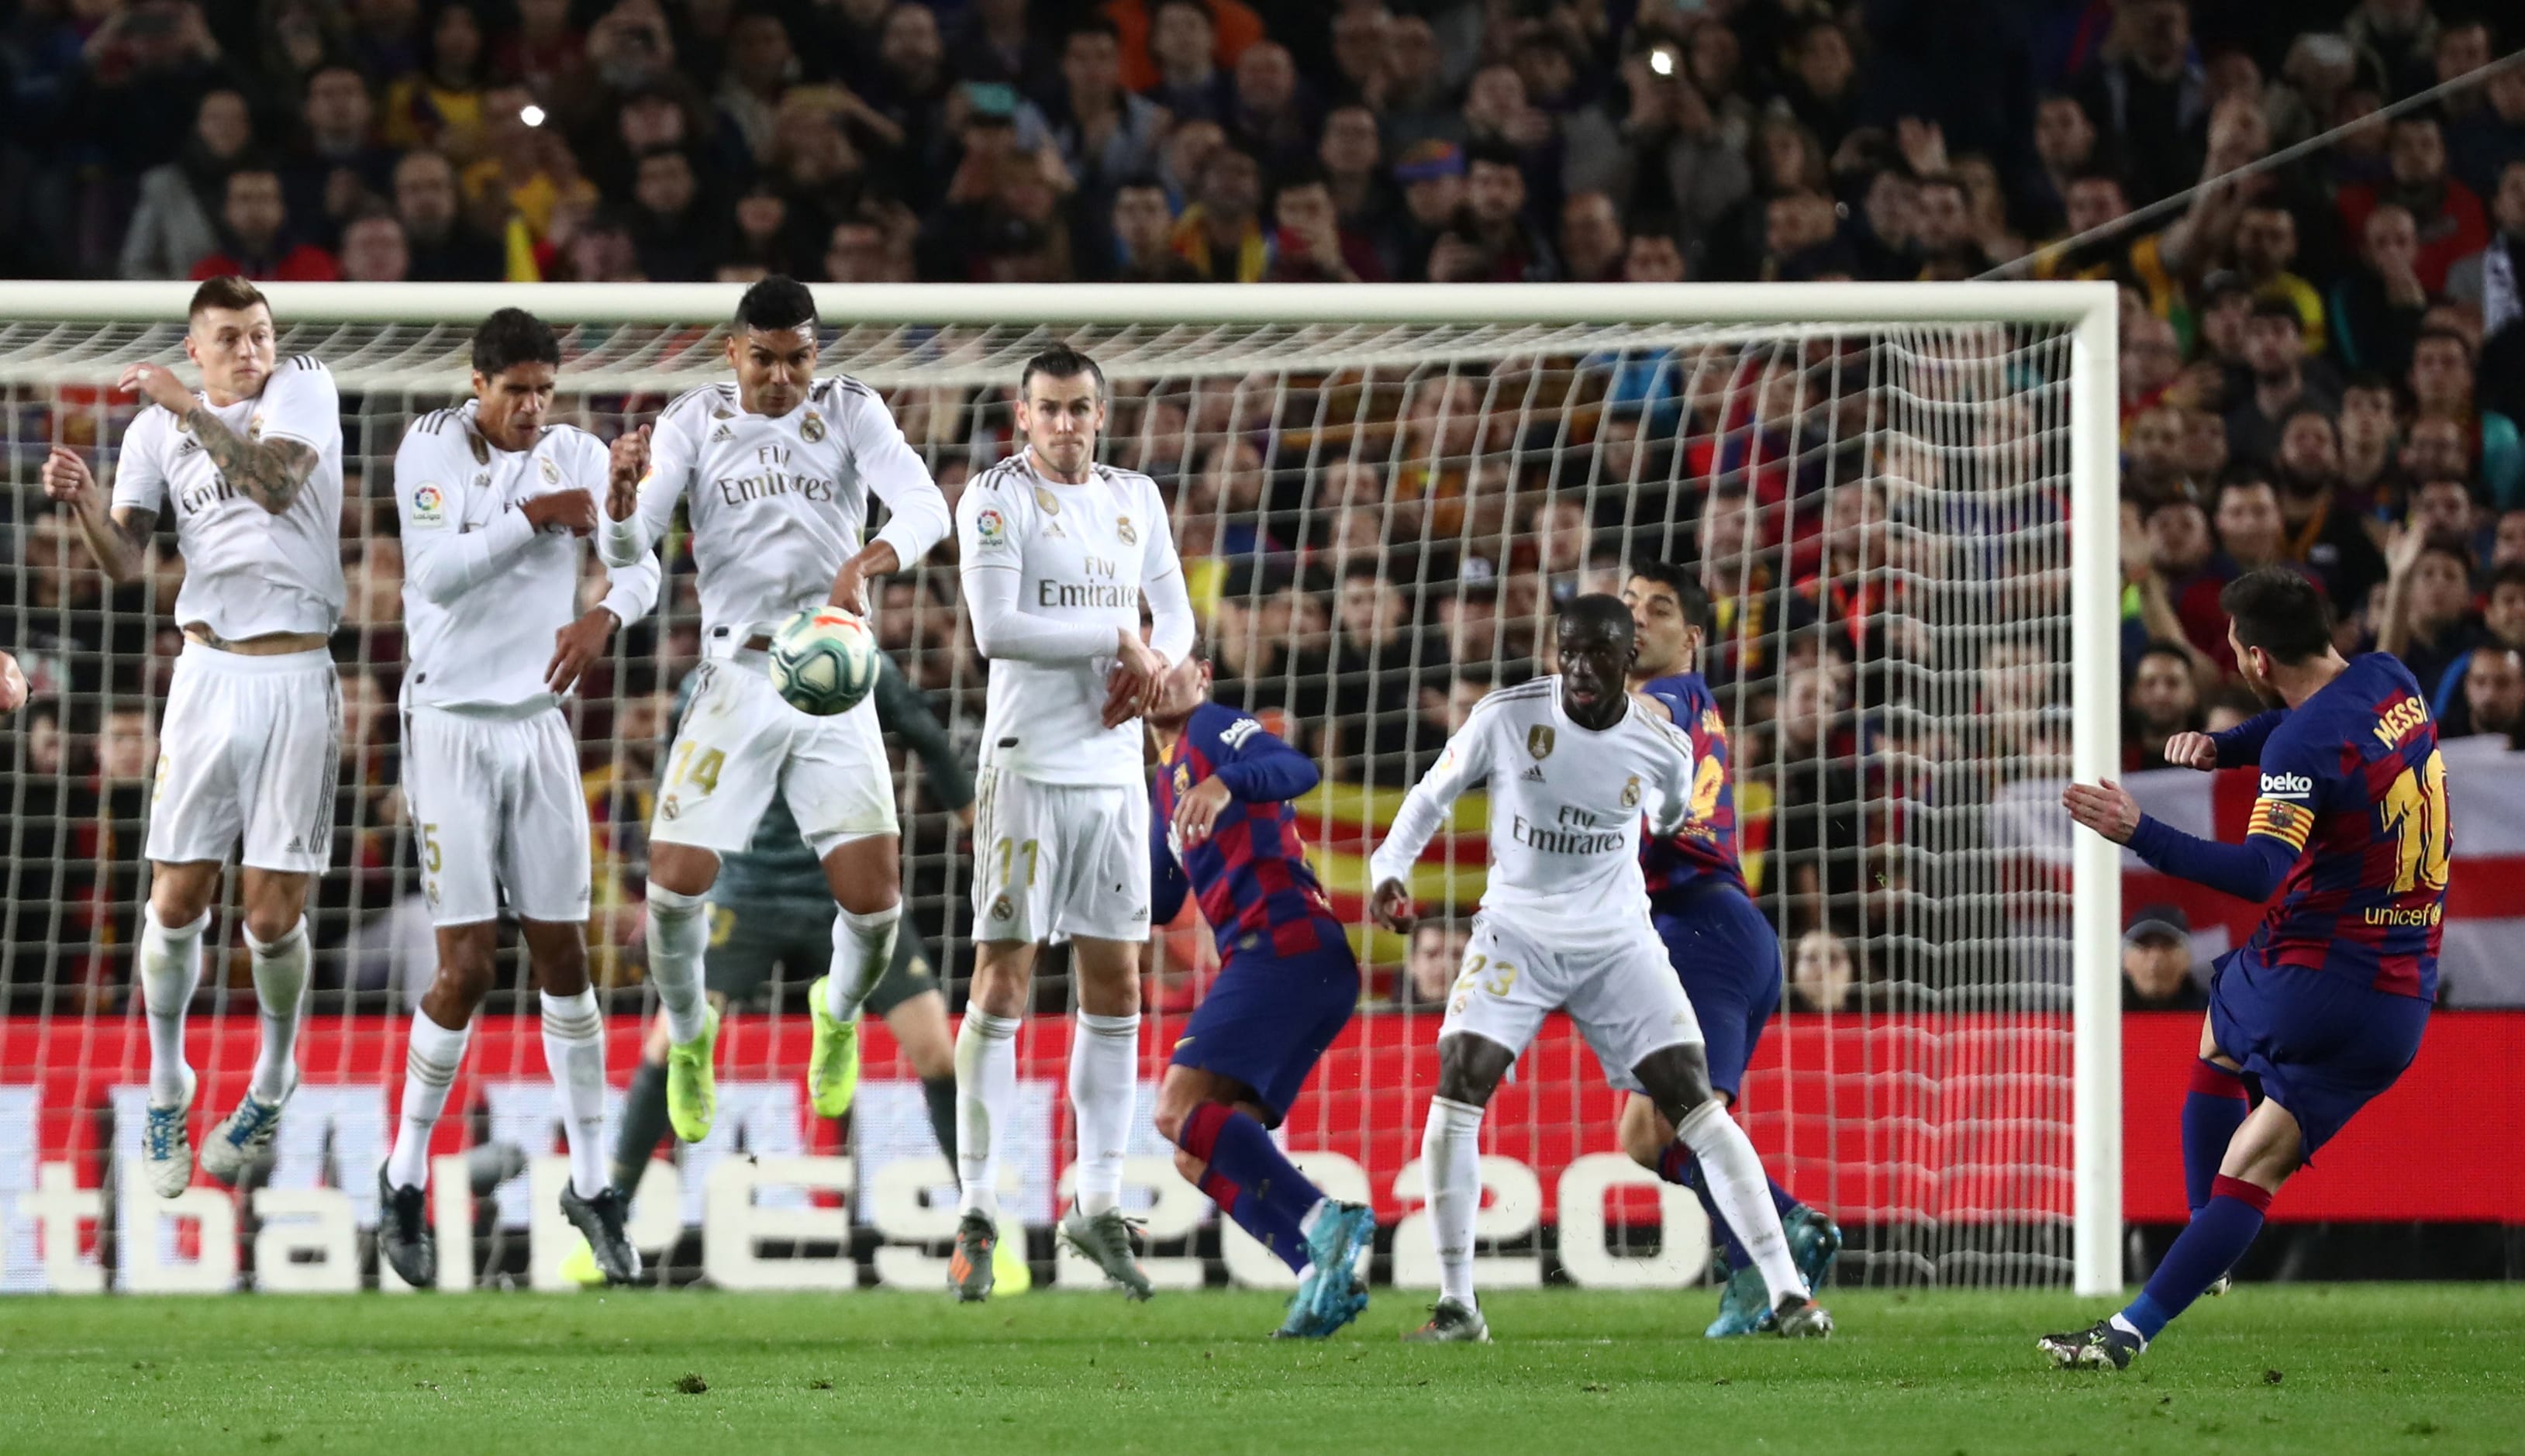 The Real Madrid wall attempts to block Leo Messi's free kick shot (by REUTERS/Sergio Perez)